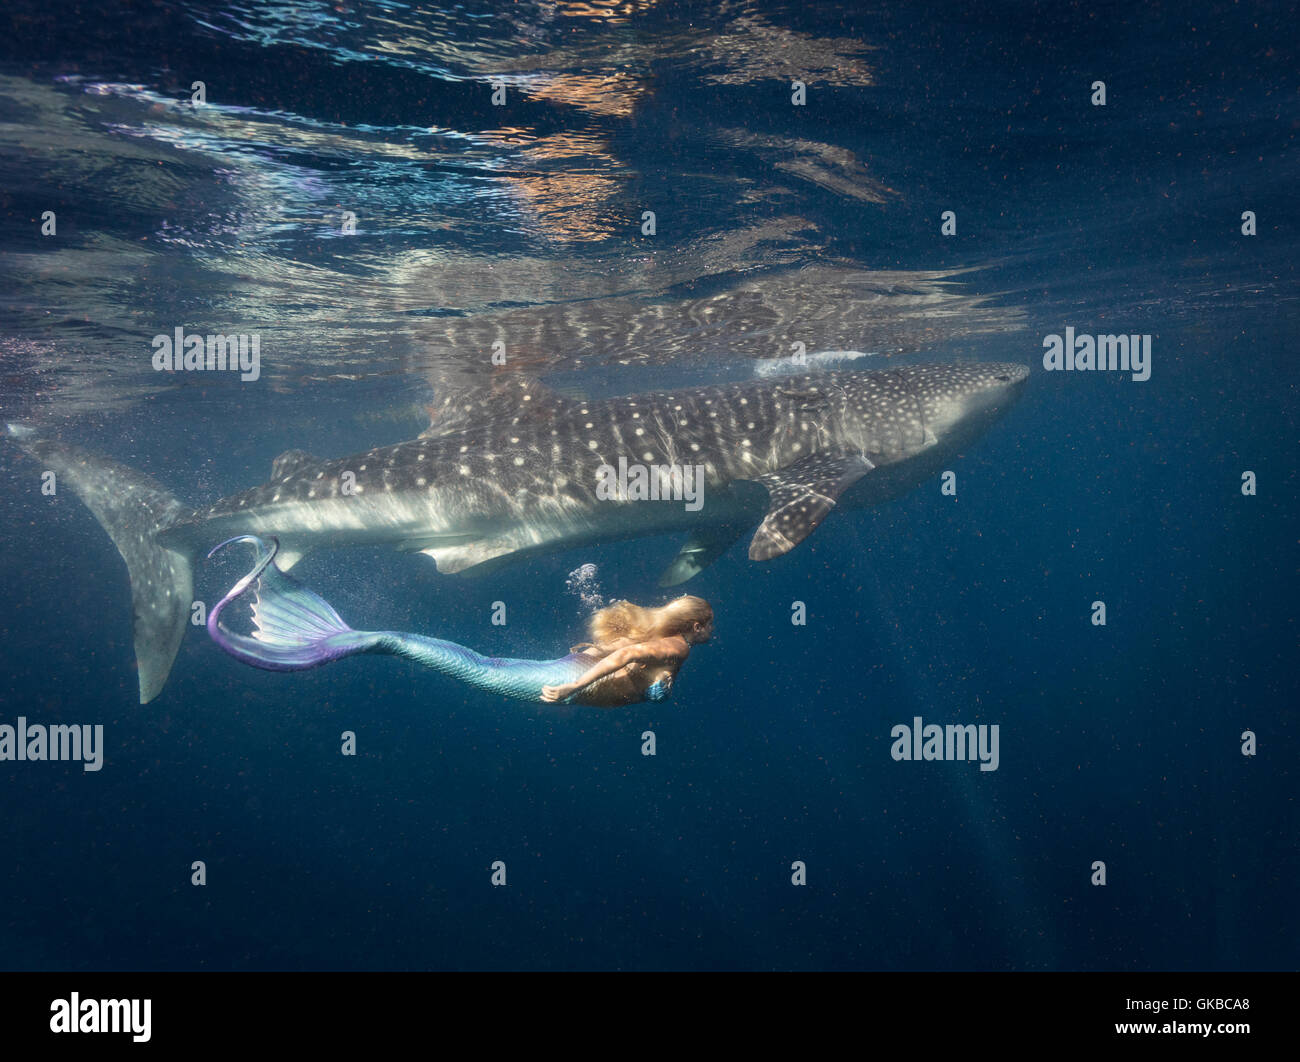 Blonde mermaid swimming with a whale shark off the coast off Isla Mujeres, Mexico Stock Photo